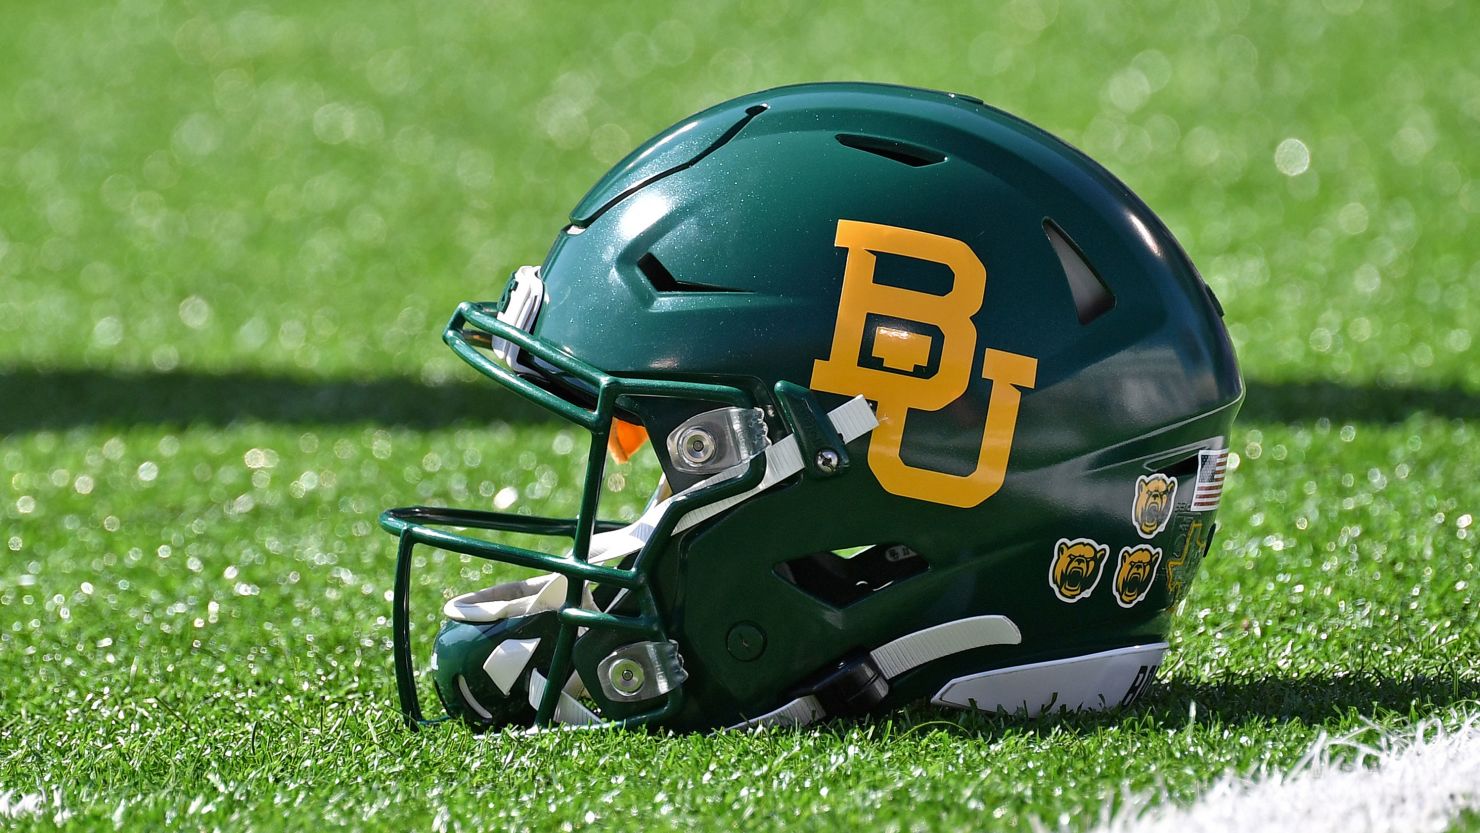 The Baylor Bears won't be playing football this weekend because of Covid-19 concerns.